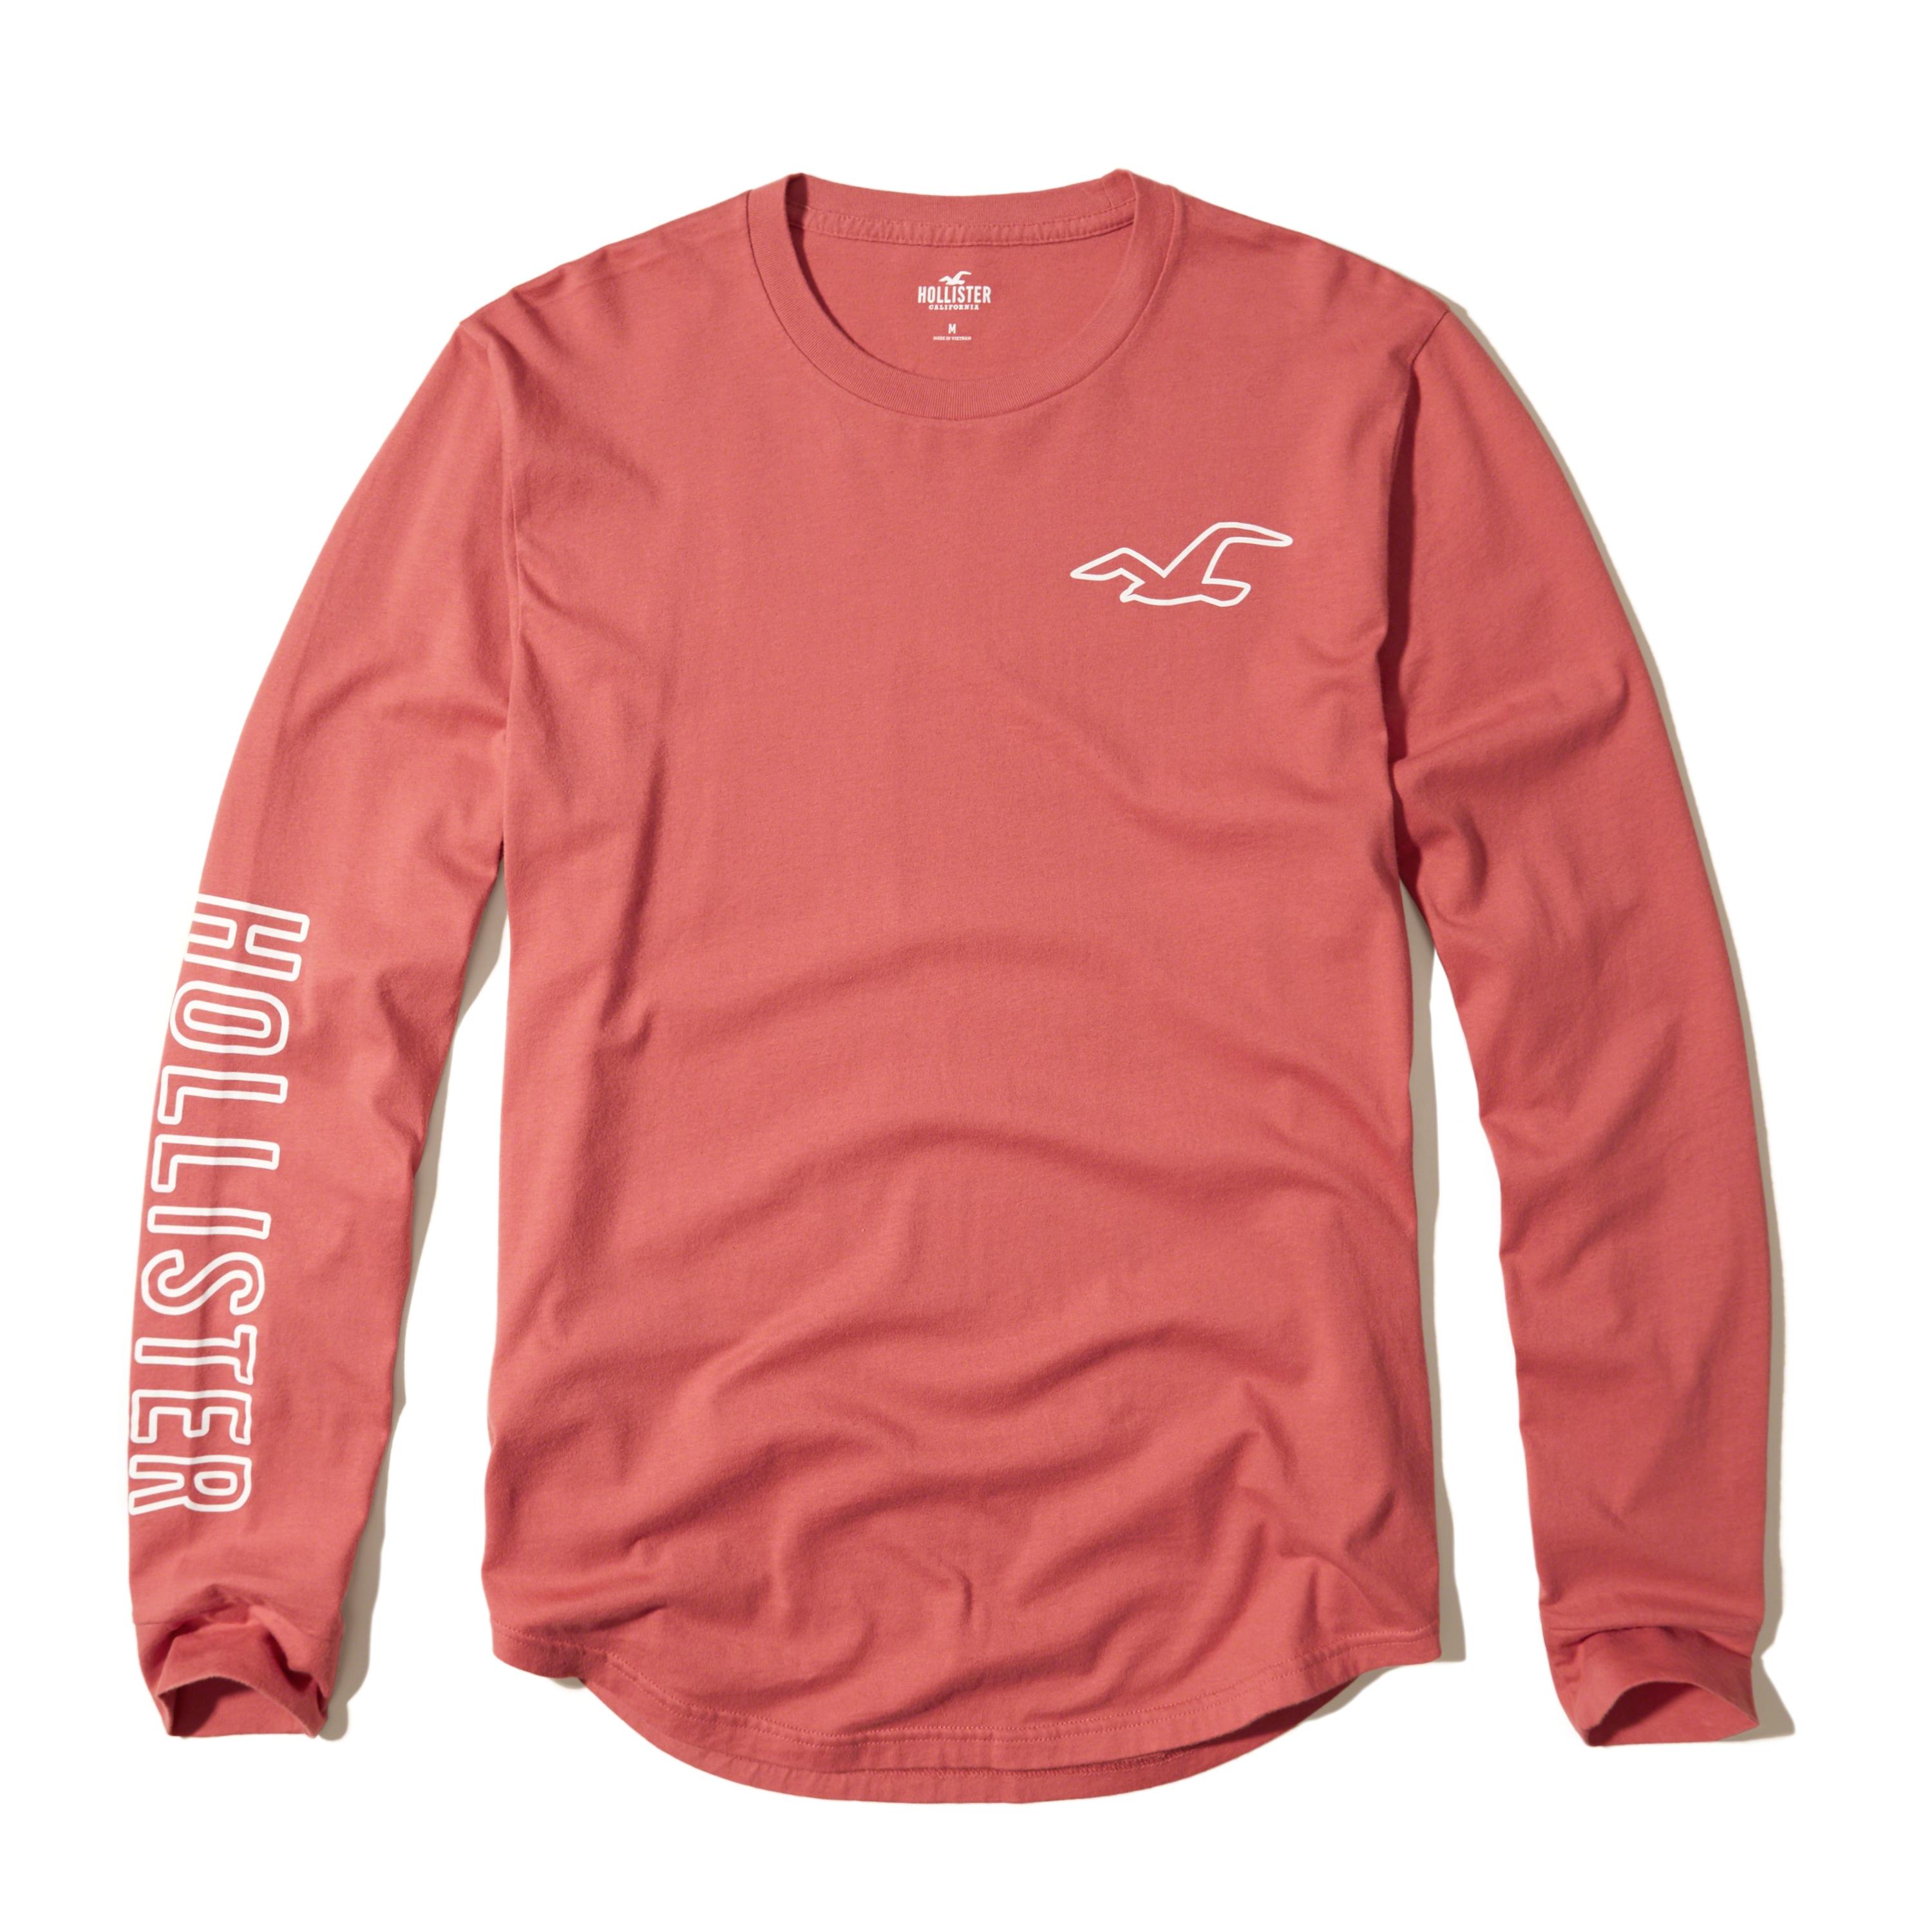 Lyst - Hollister Logo Graphic Tee in Pink for Men